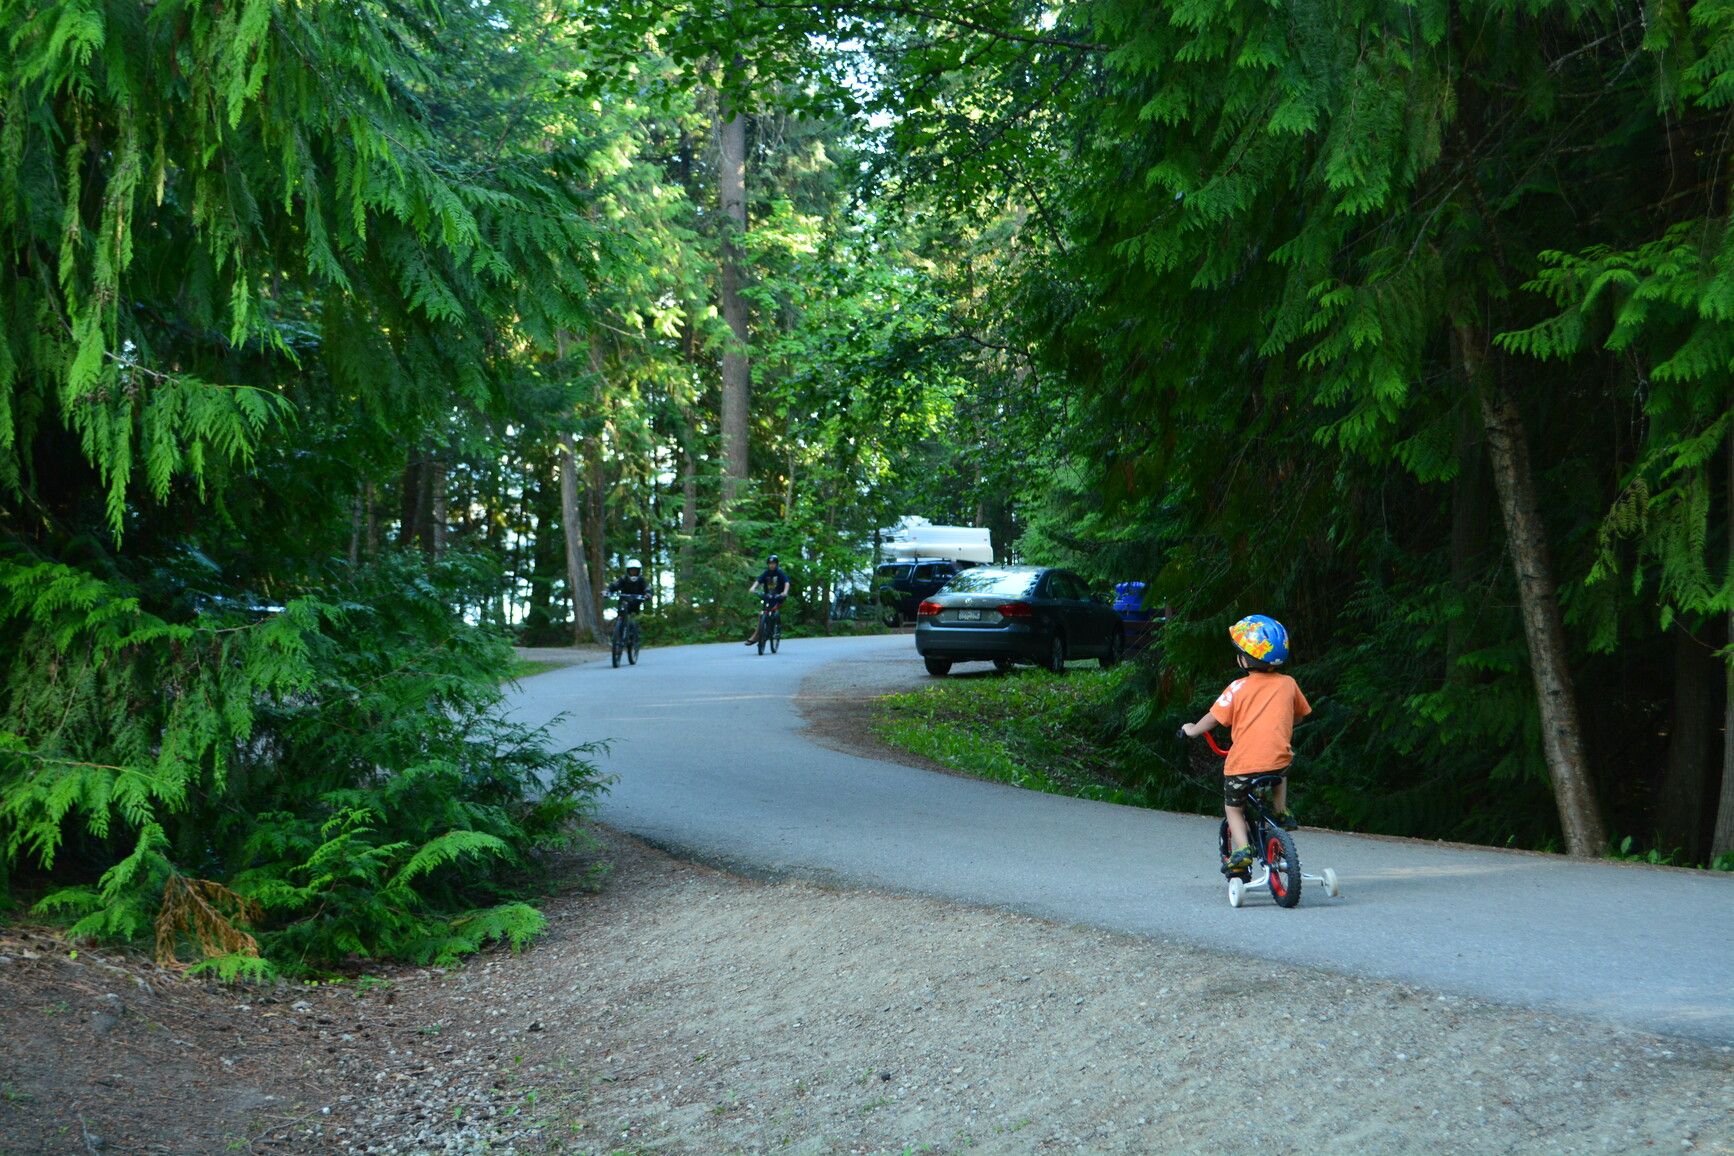 Herald Park campground has paved roads for kids to ride bikes on.